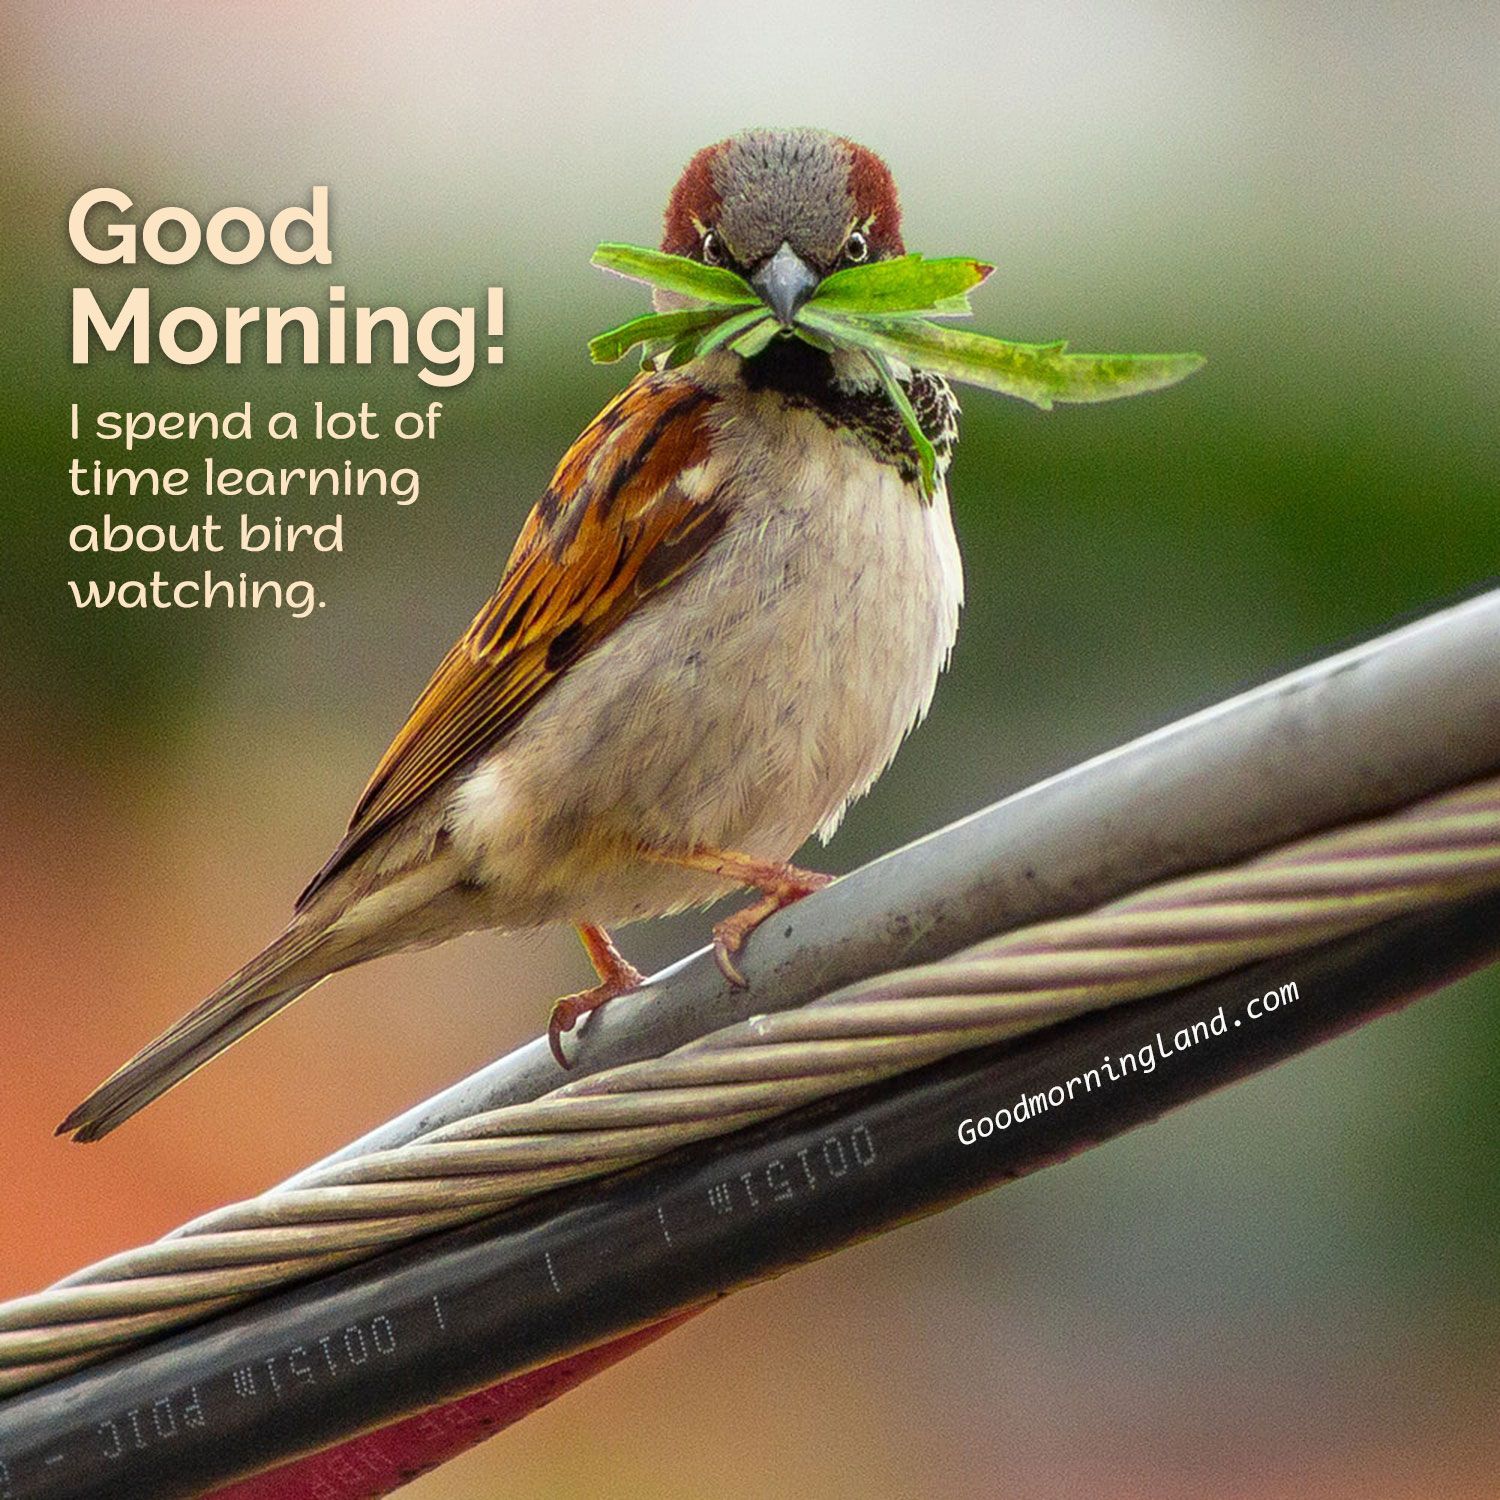 Good Morning Birds Images With Quotes